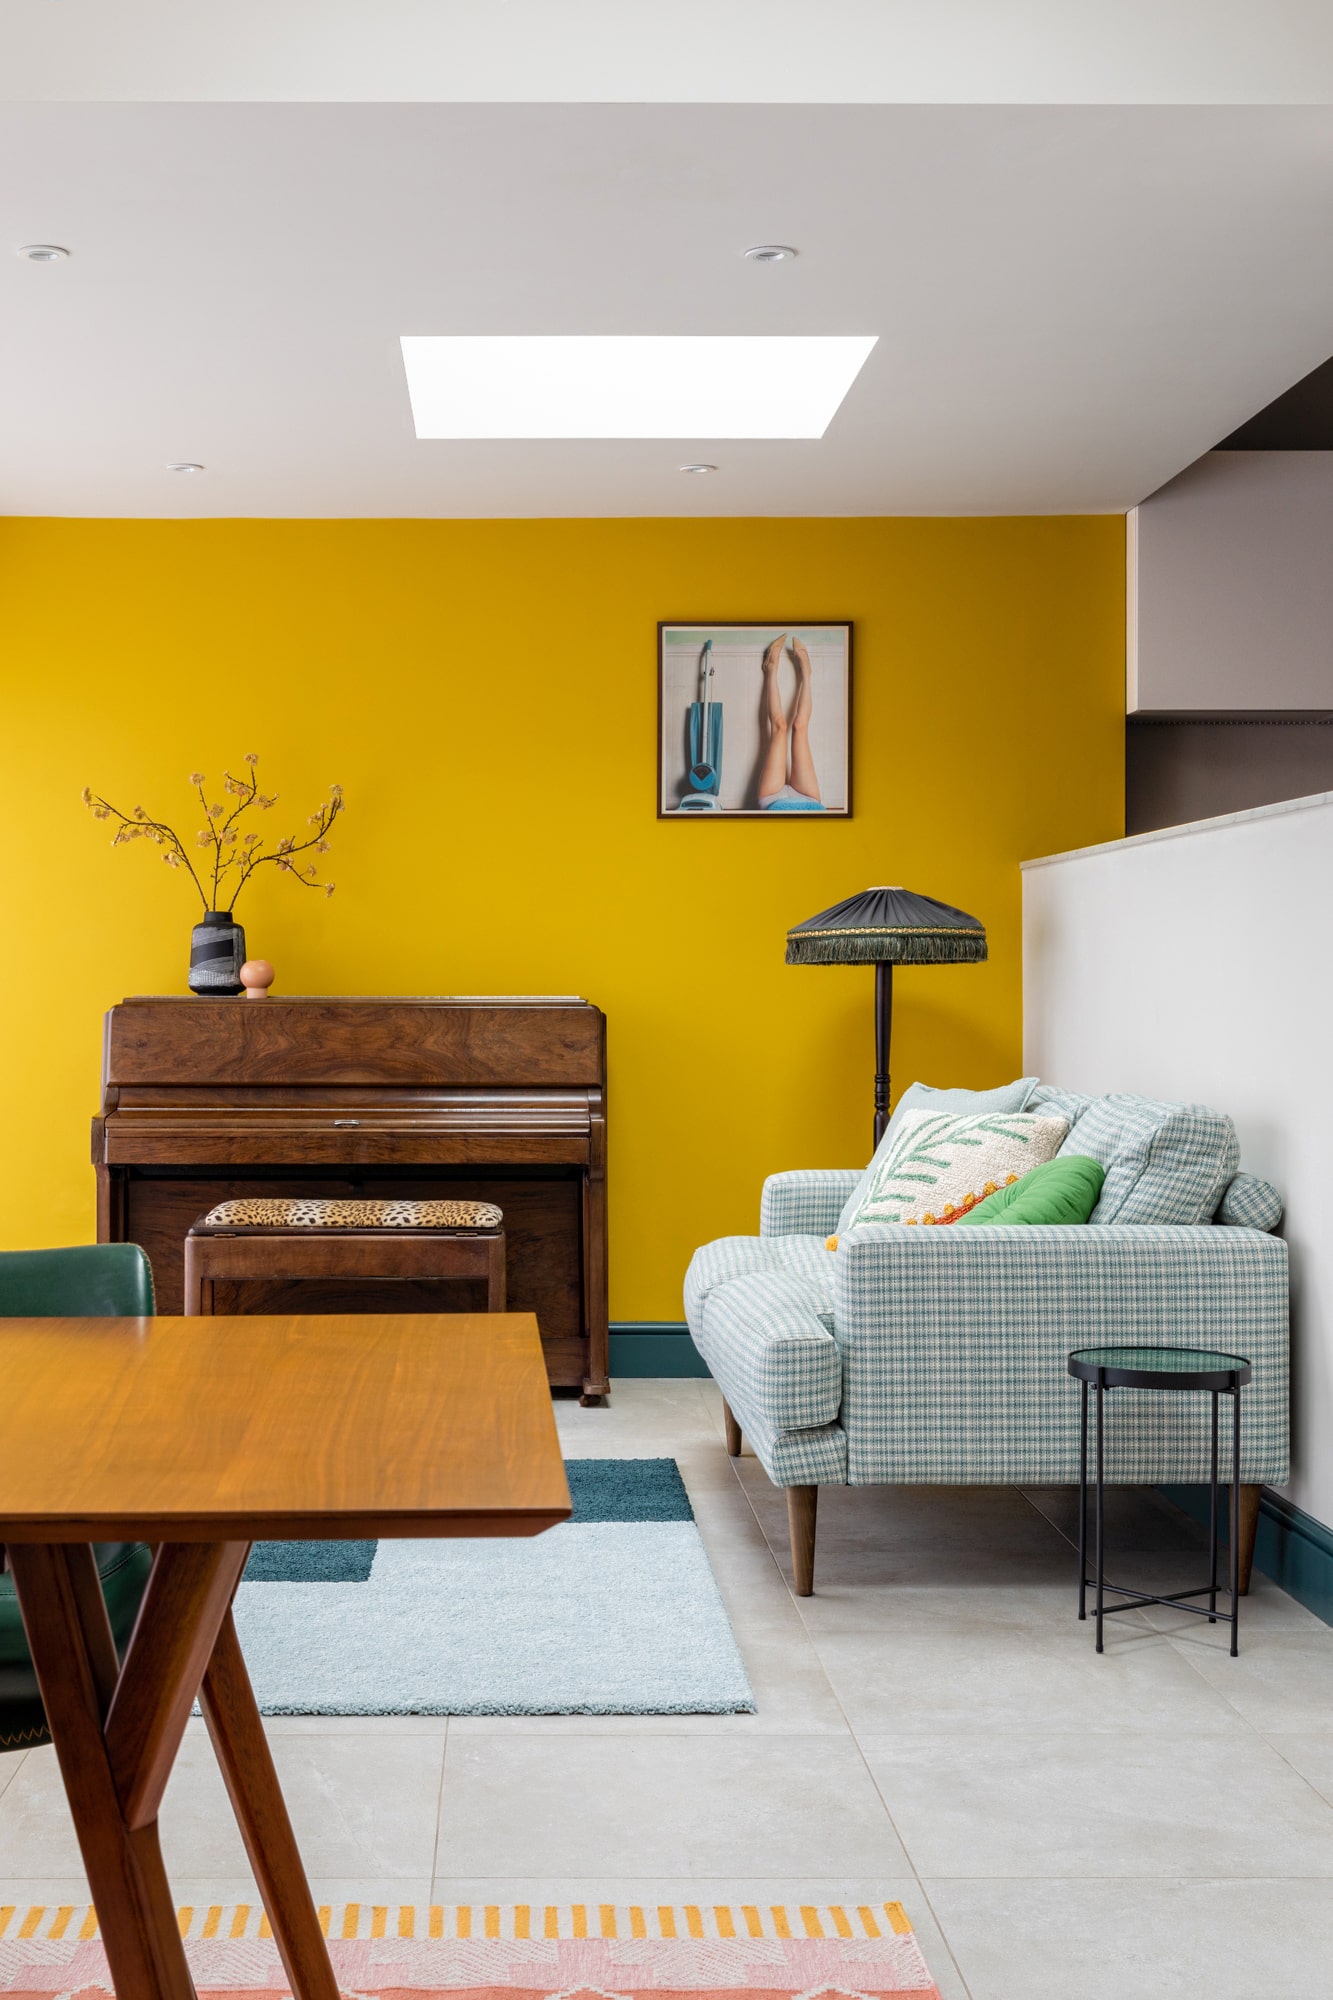 Interior design photo: a view from a dining area to a sitting living room area with a wooden table, a yellow wall, a brown piano and a sofa upholstered with green gingham pattern